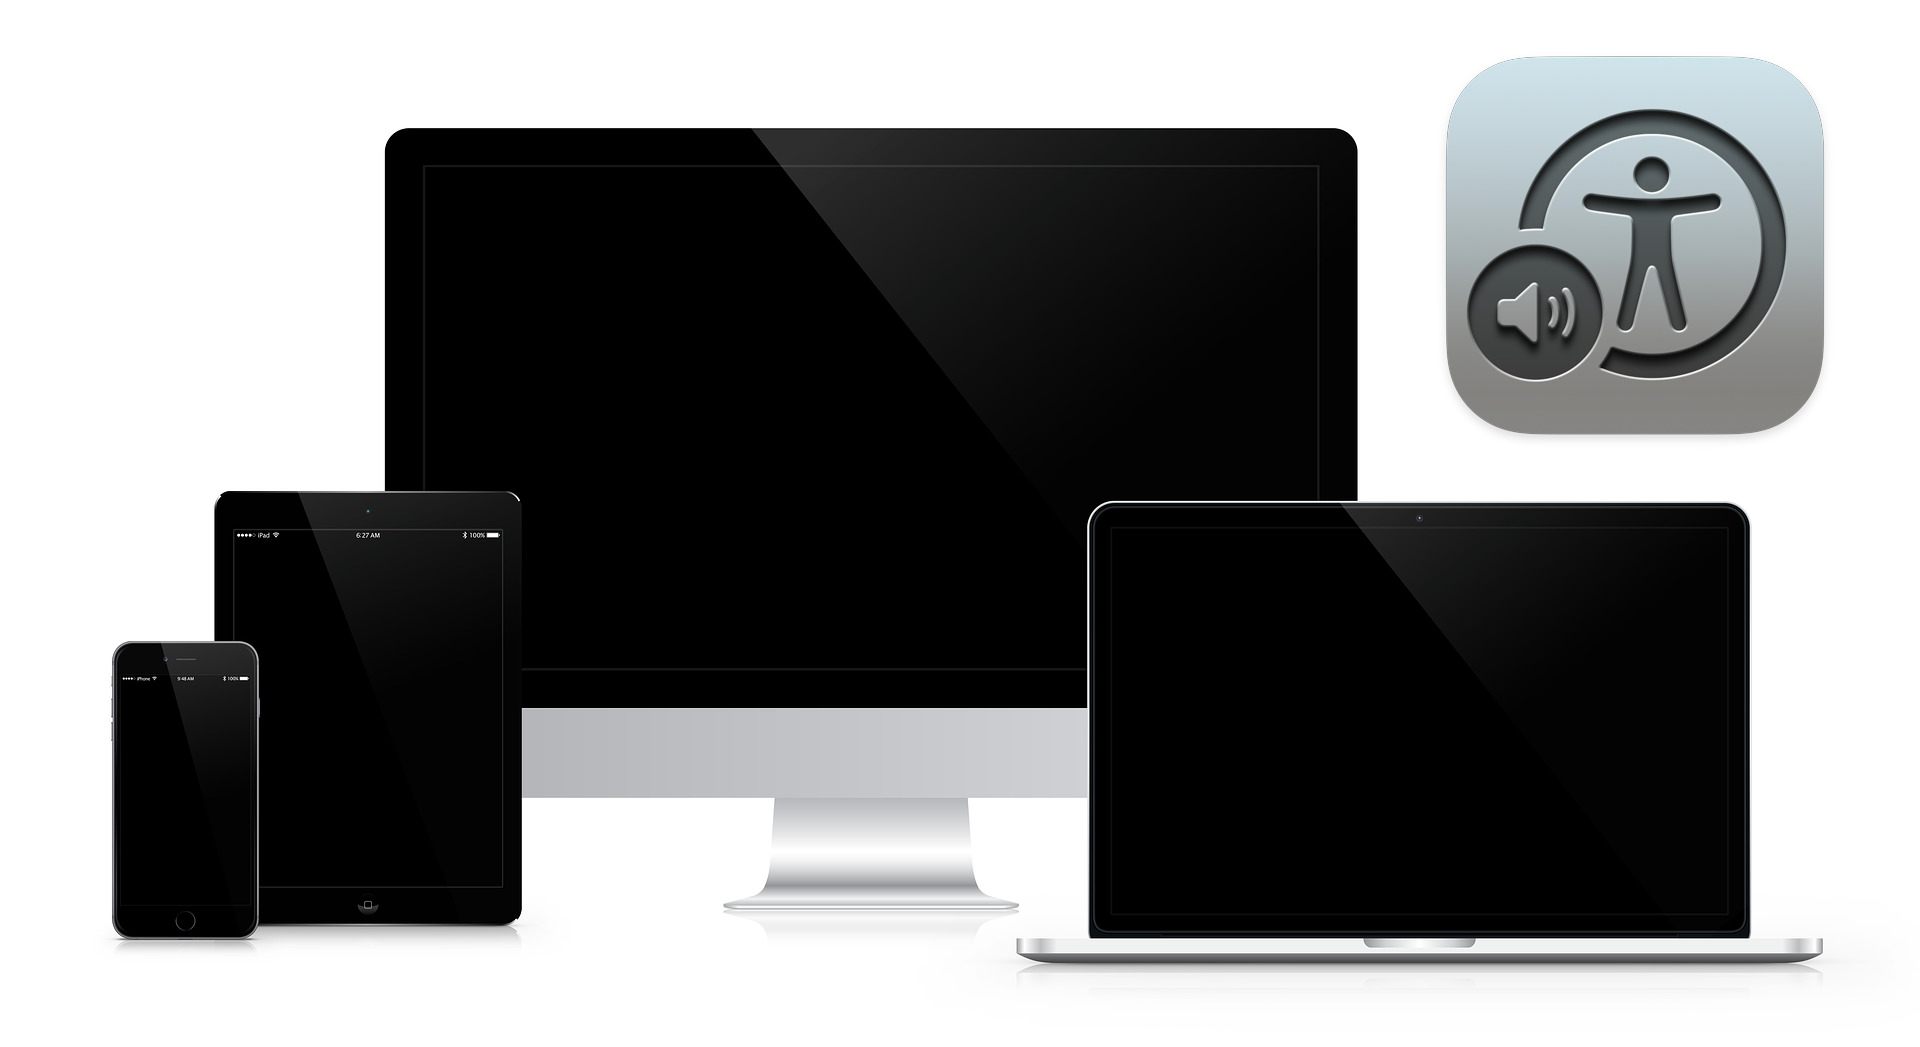 4 devices: mobile phone, tablet, laptop, and desktop computer